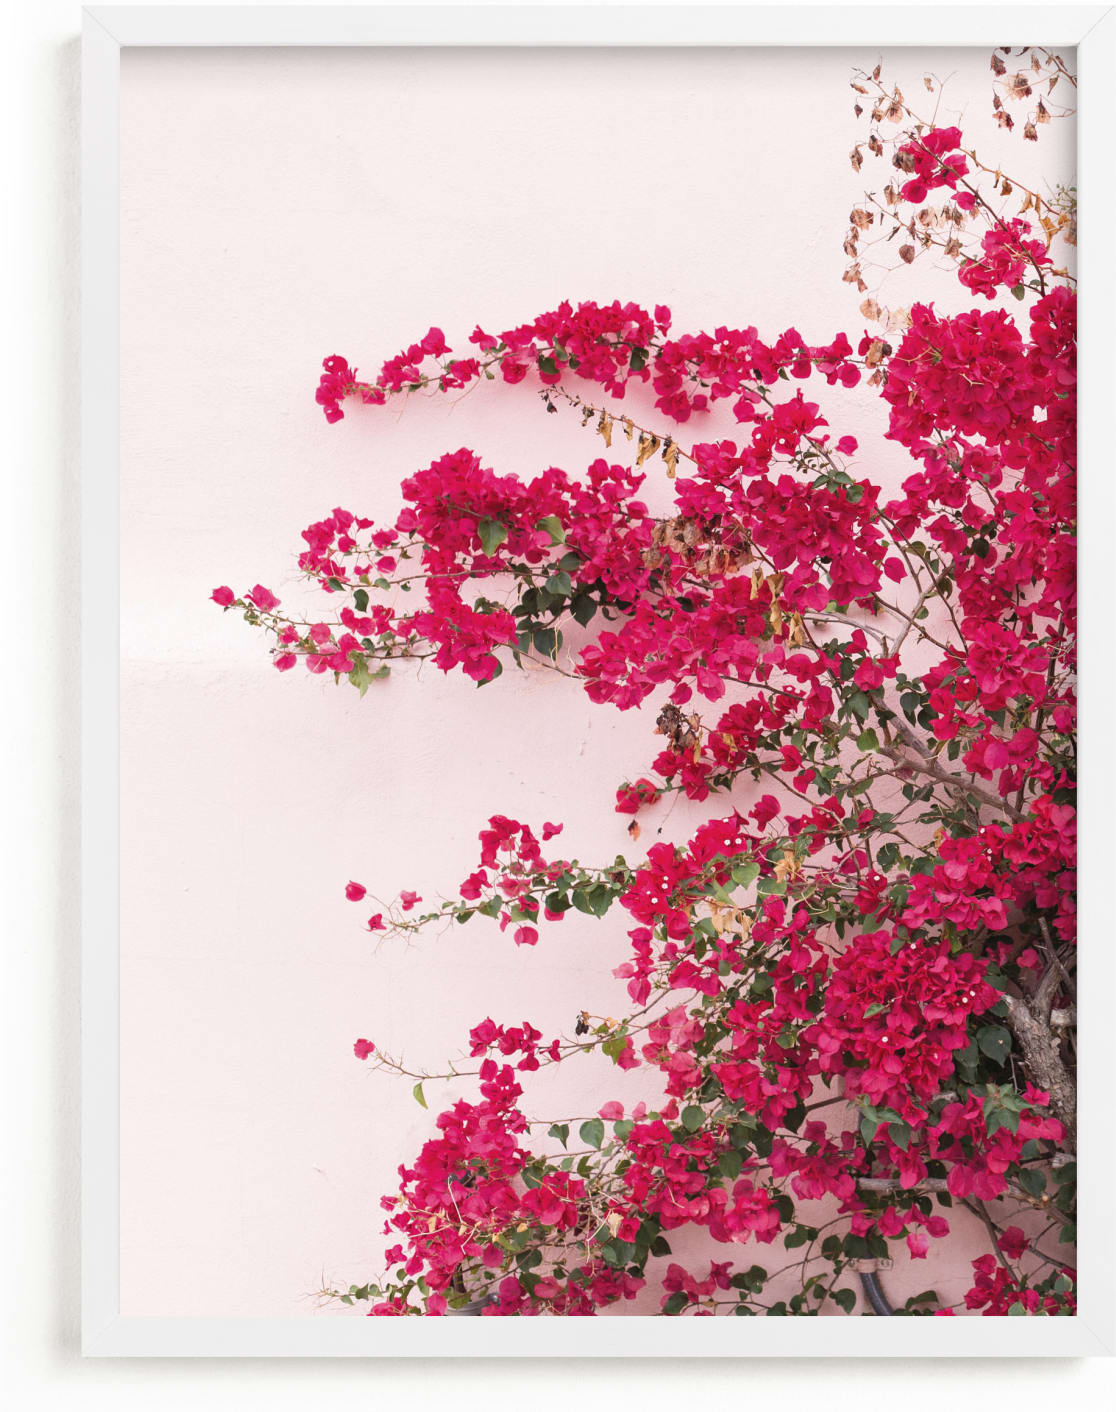 This is a pink art by The One With Wanderlust called Bright Bougainvillea.